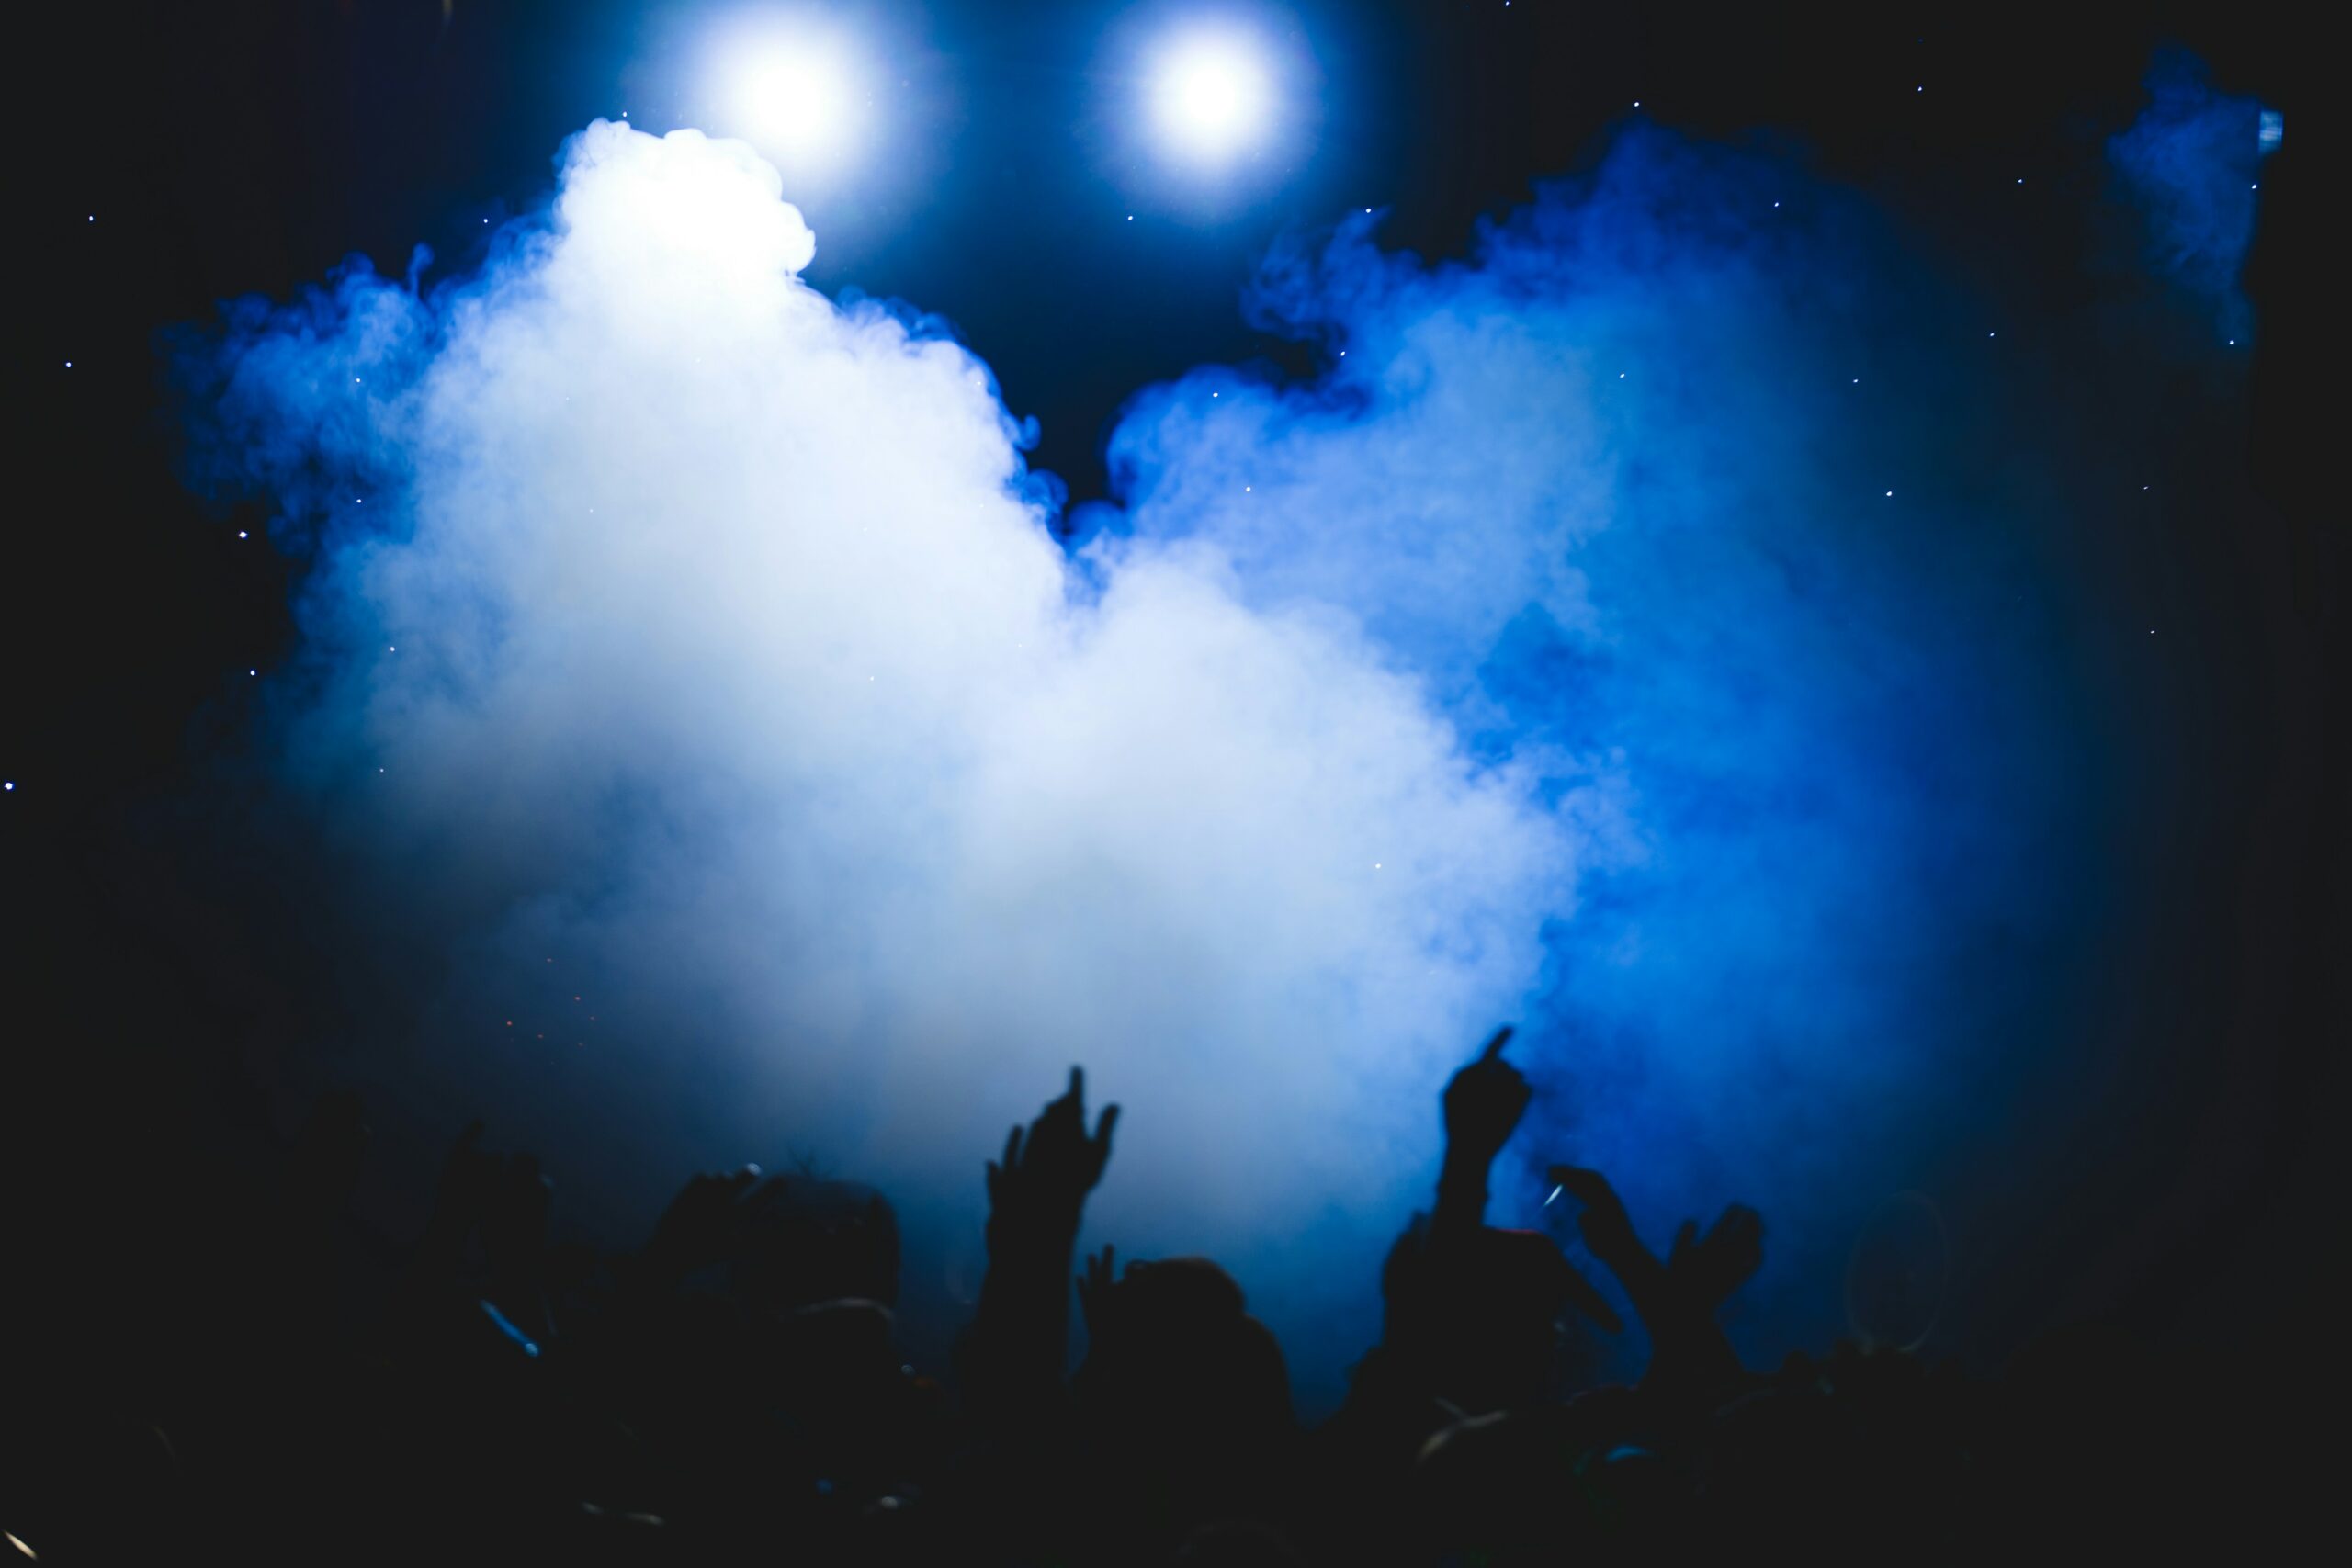 The silhouette of people raising their arms and partying at the base of a blue cloud of smoke at a stoner event.